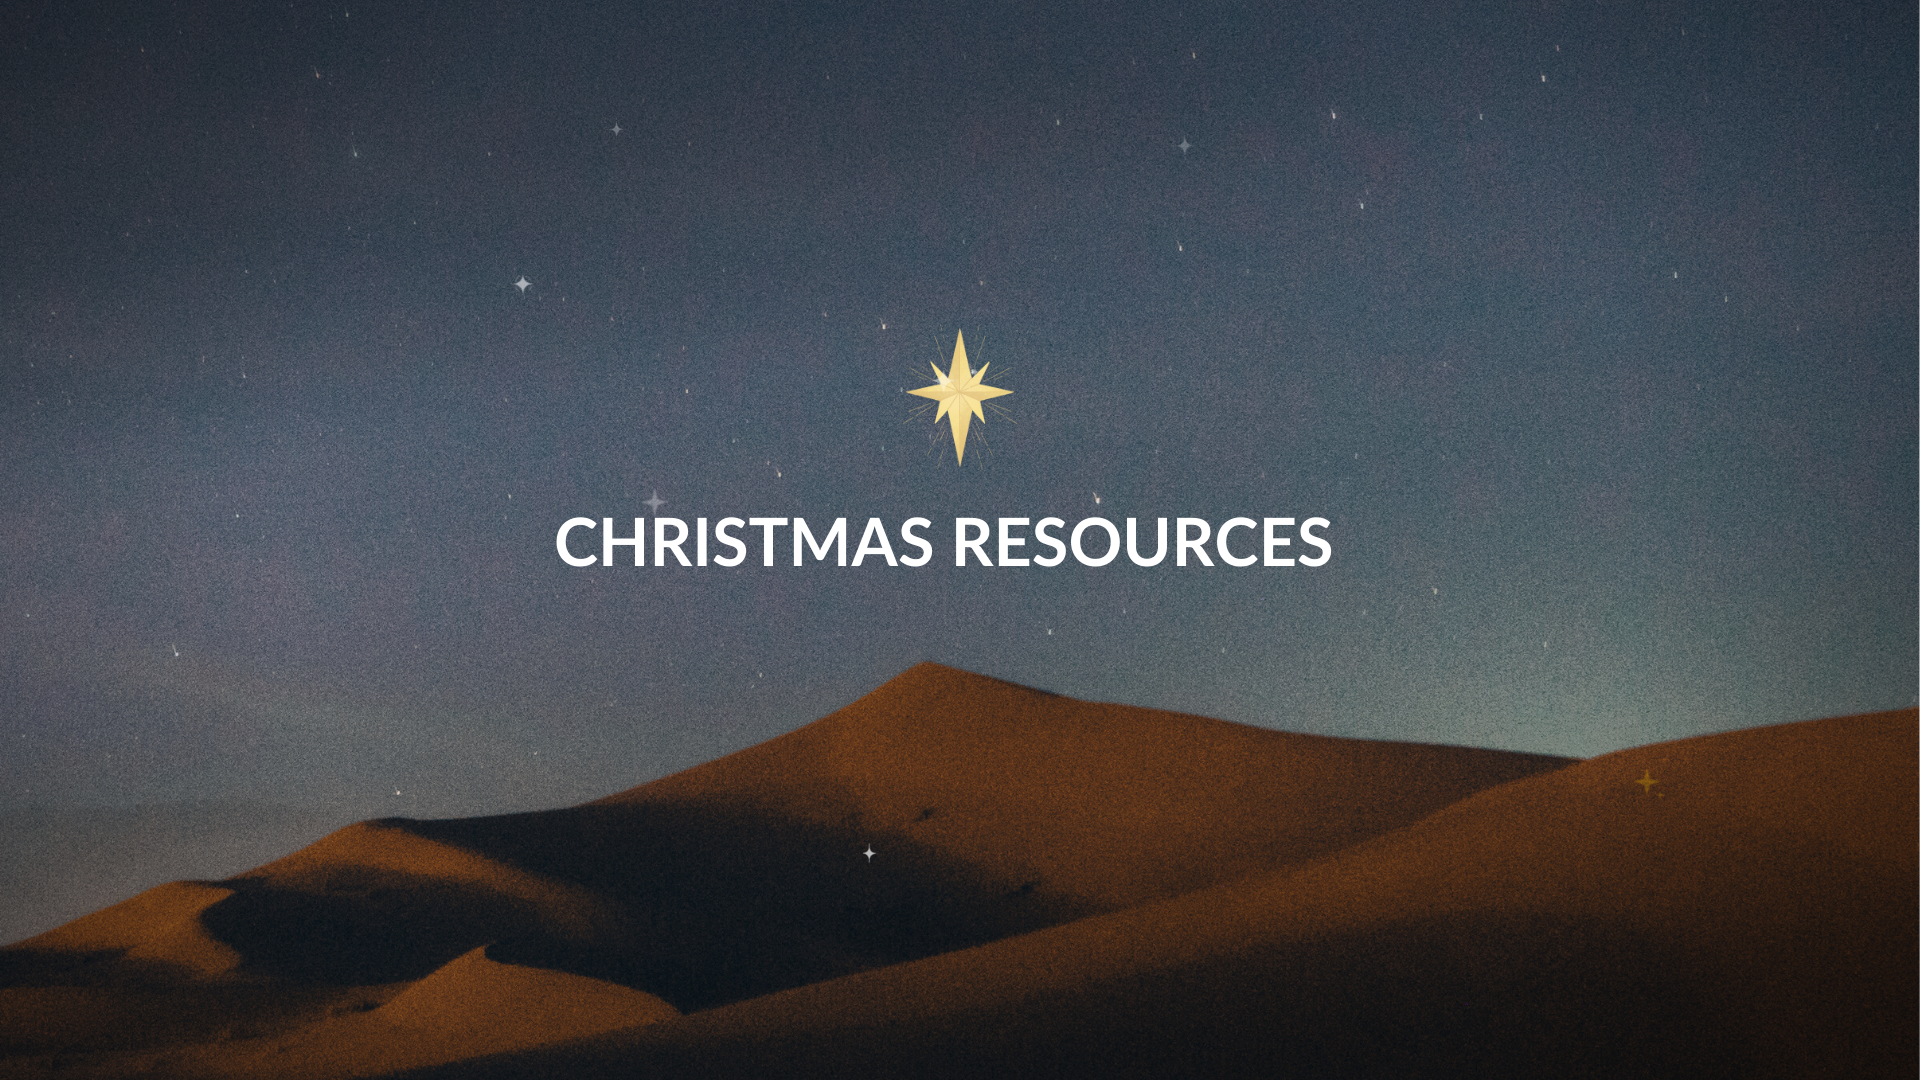 Christmas Resources for 2021